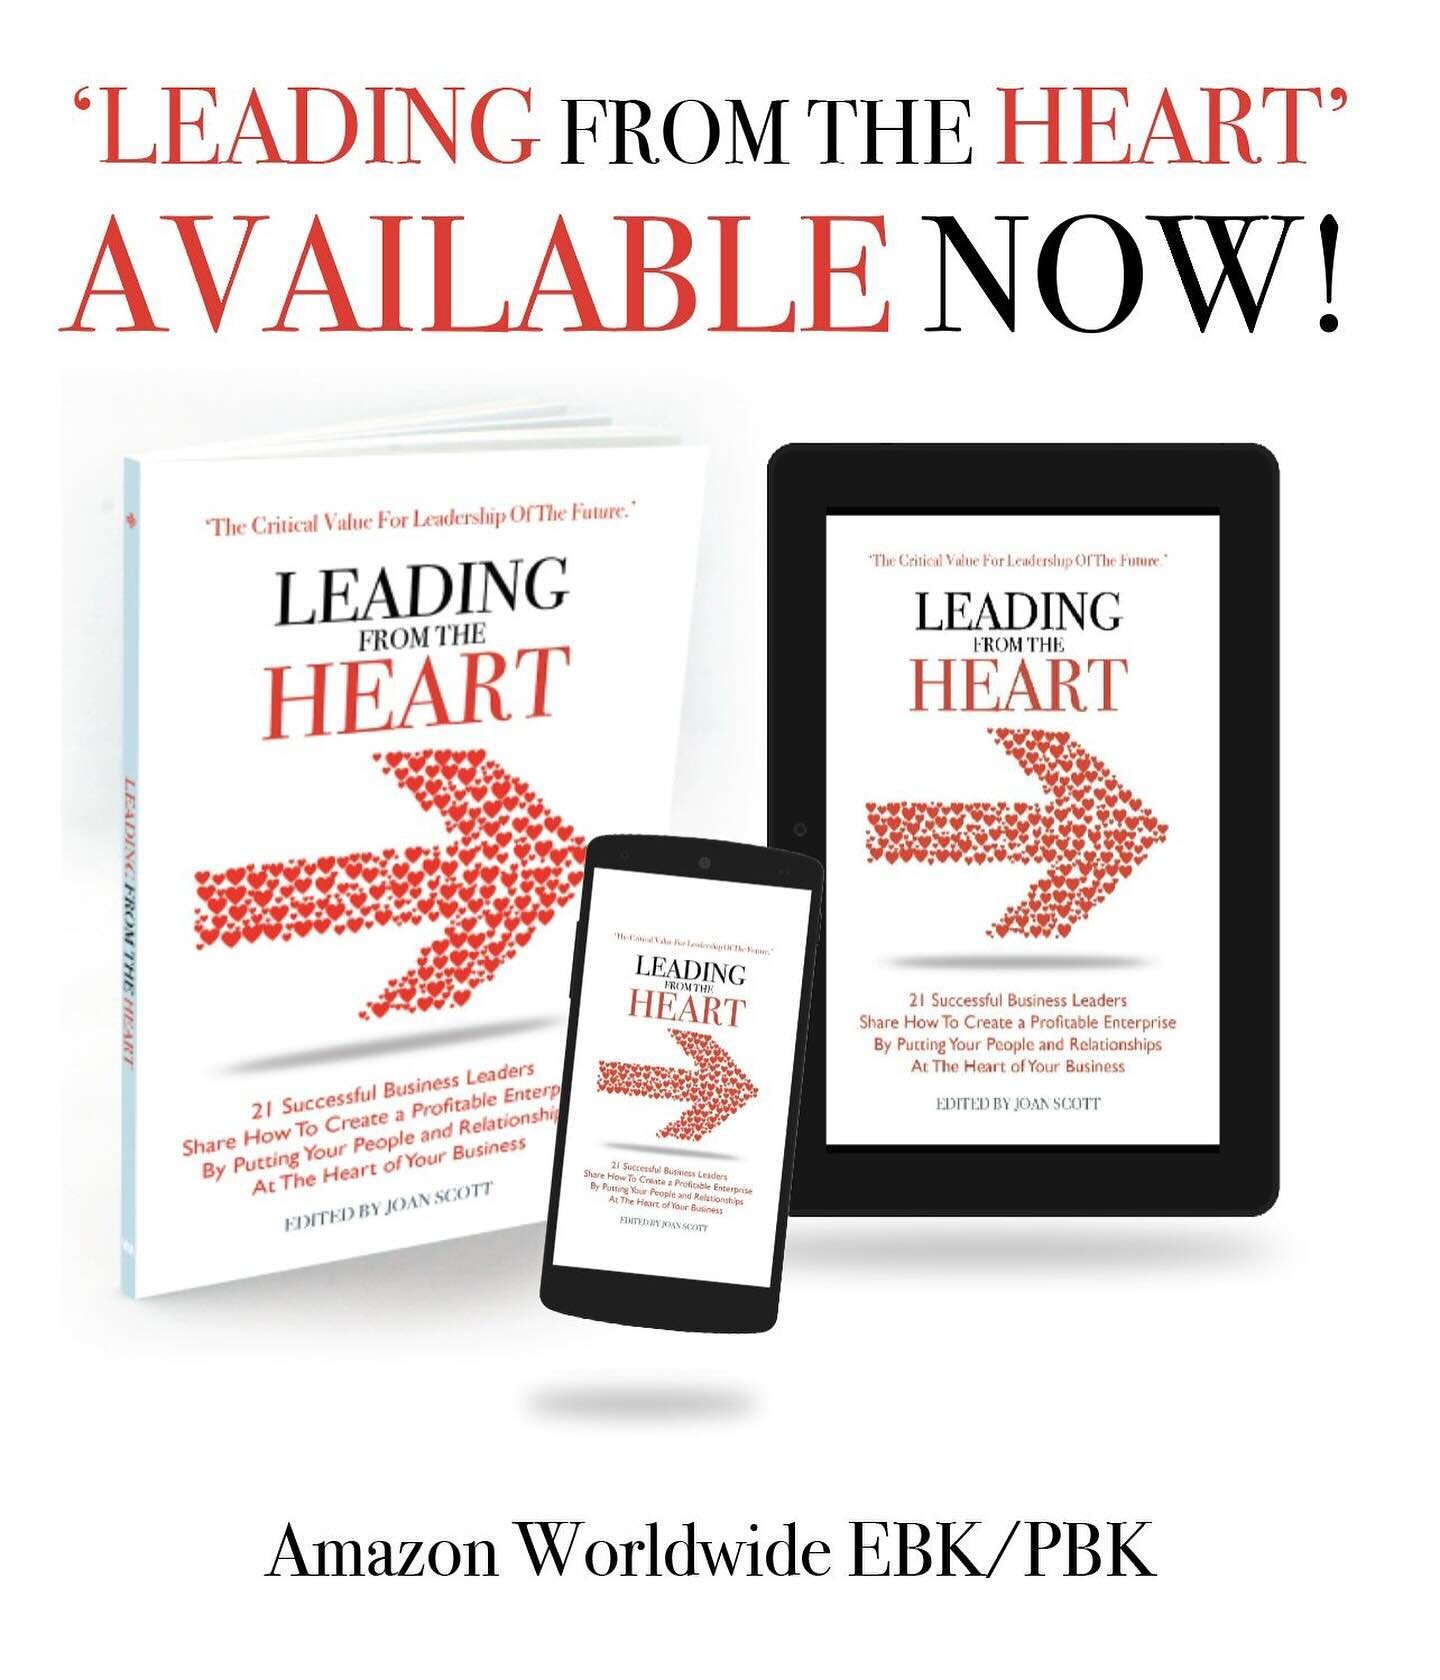 We are live! 

I wrote a chapter for this book. It&rsquo;s learnings from 21 leaders in how putting your people first builds a profitable business. My part is about what other industries can learn from Hospitality - treating employees with the same c